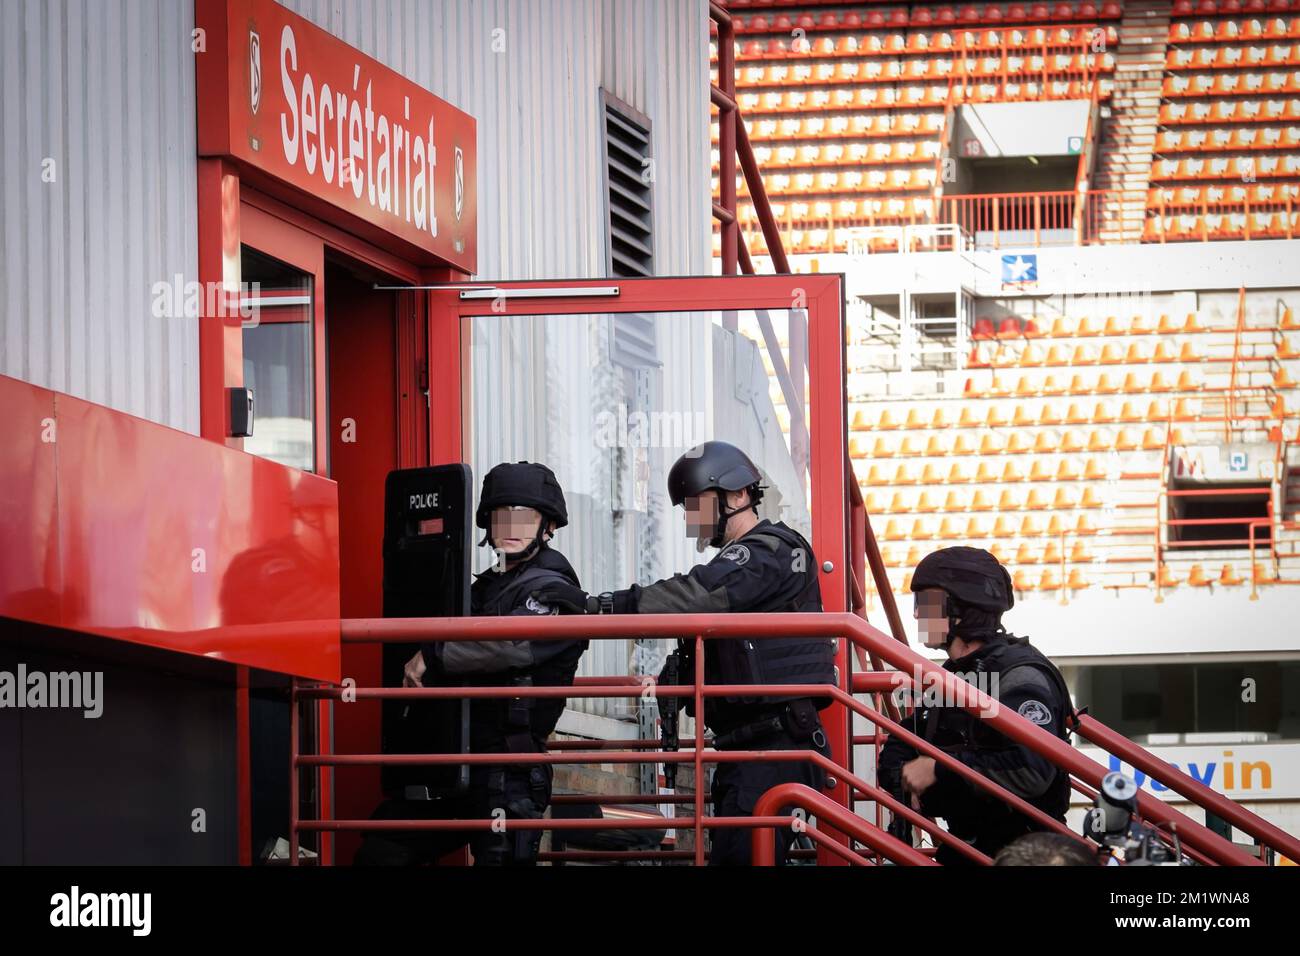 20141020 - LIEGE, BELGIUM: Illustration picture shows police at the Sclessin stadium of Belgian soccer team Standard de Liege, after a robbery took place this morning, Monday 20 October 2014. BELGA PHOTO NICOLAS LAMBERT Stock Photo